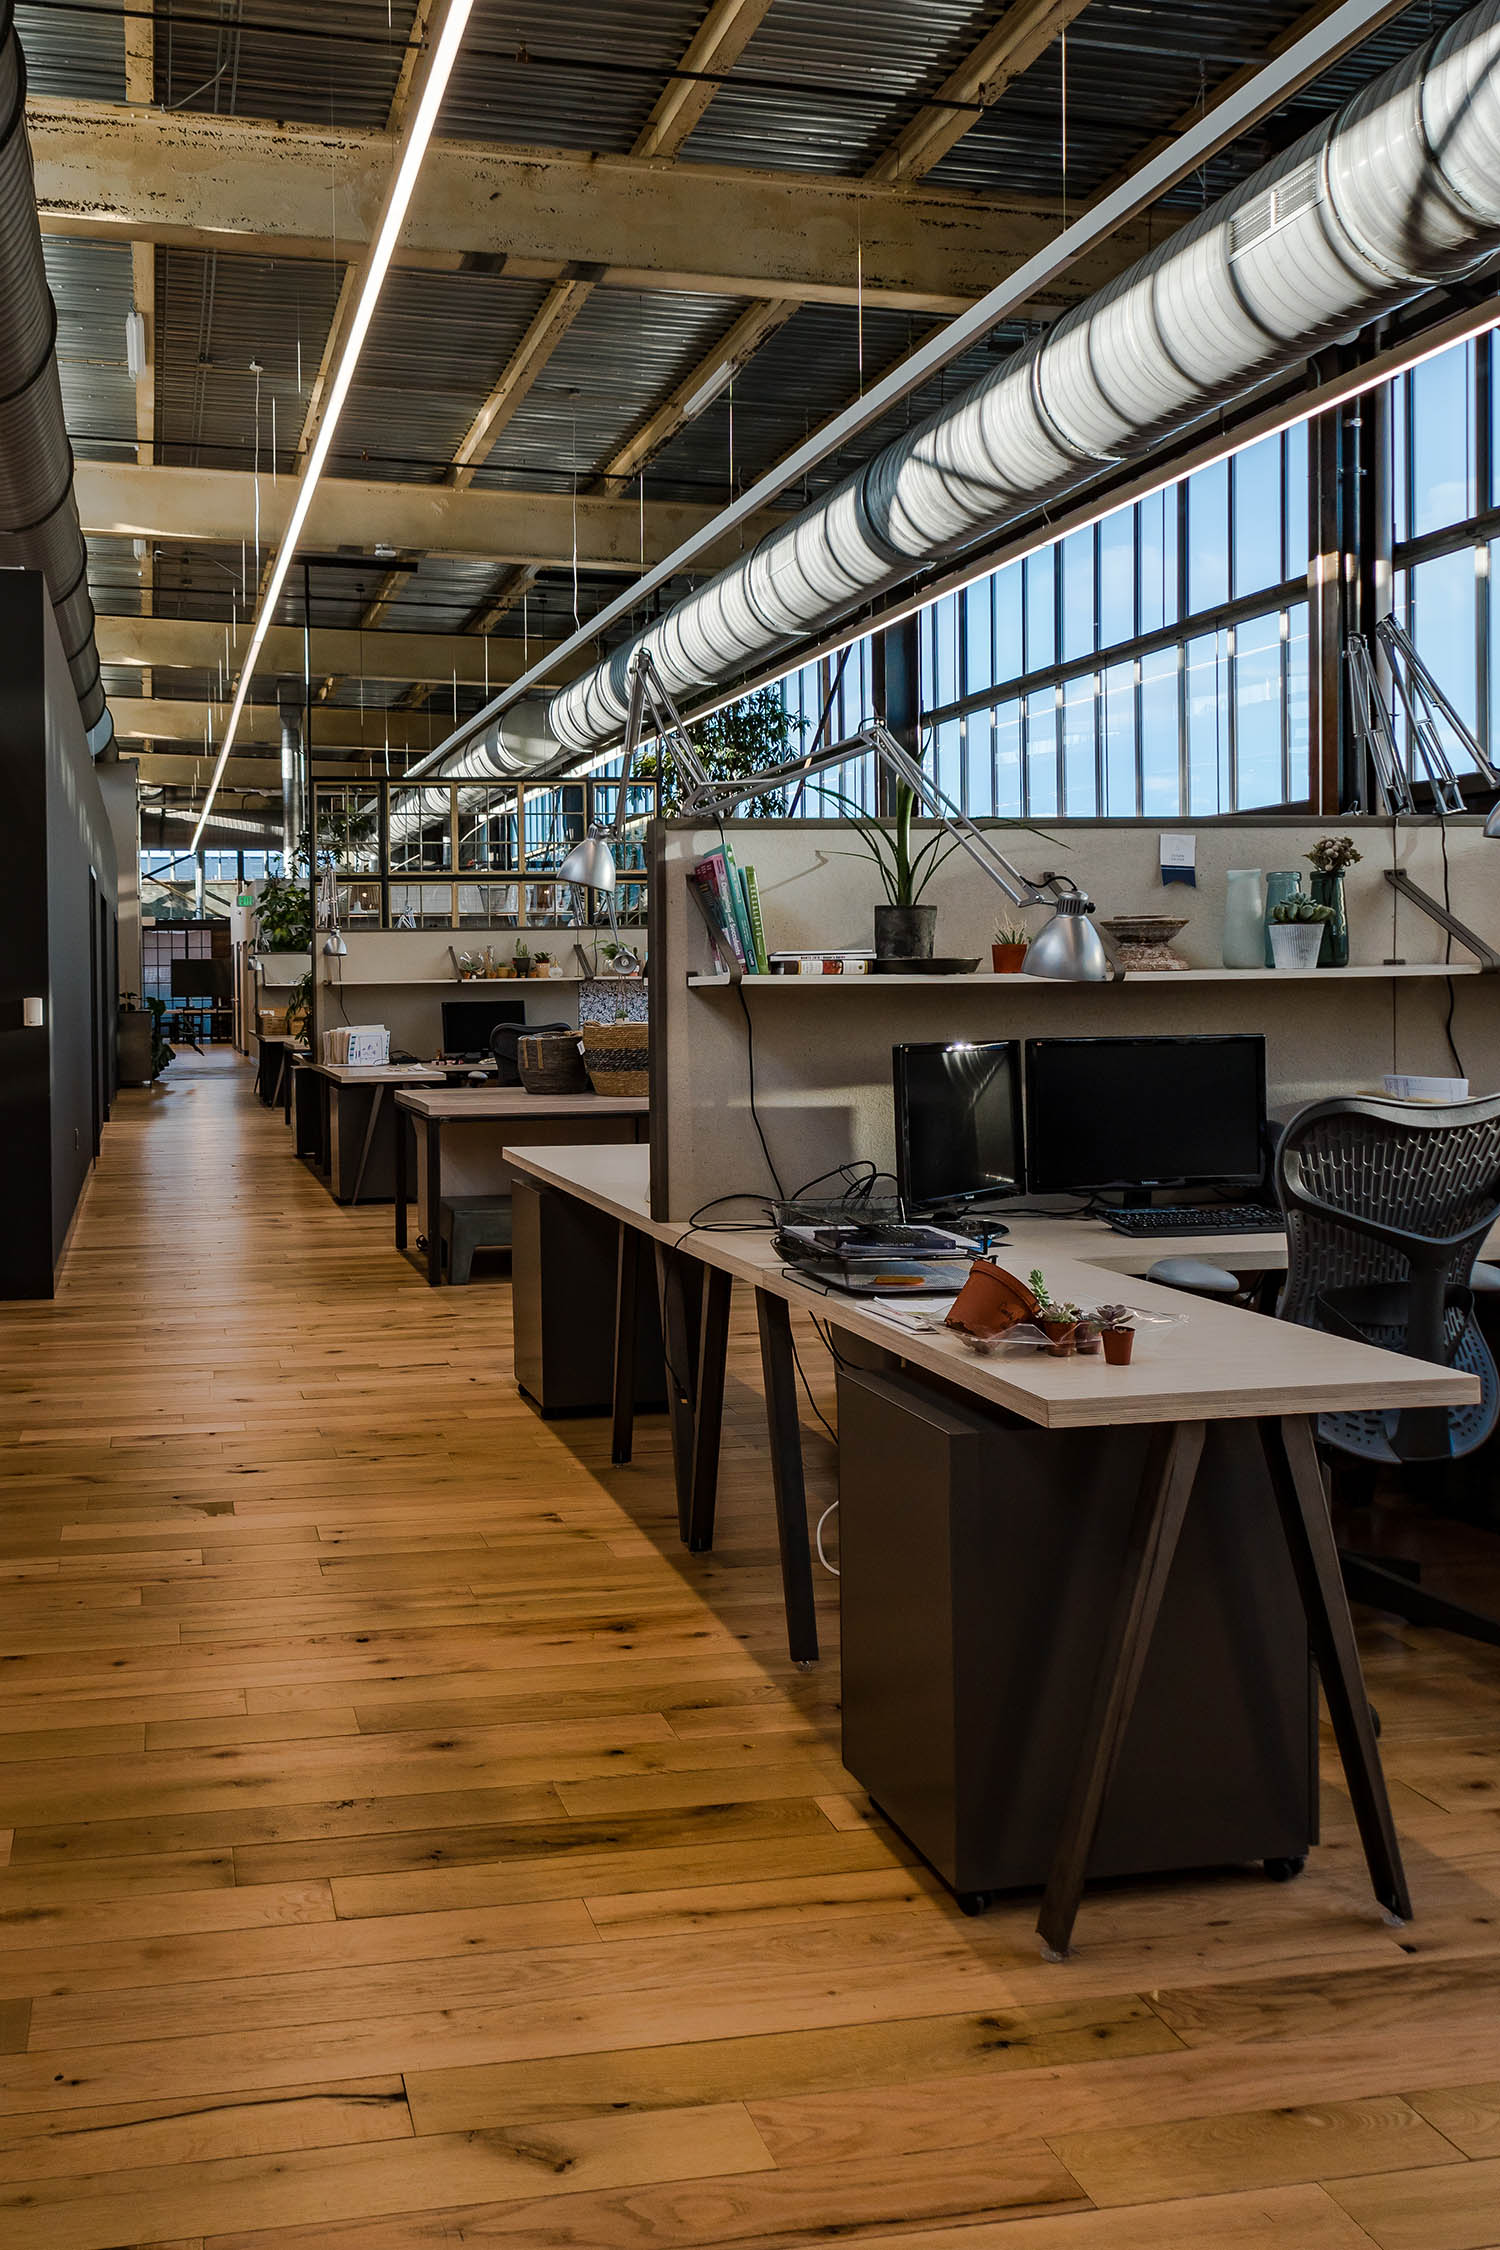 Terrain workspaces, designed in collaboration with NewStudio Architecture, for the Navy Yard Building 18 Annex